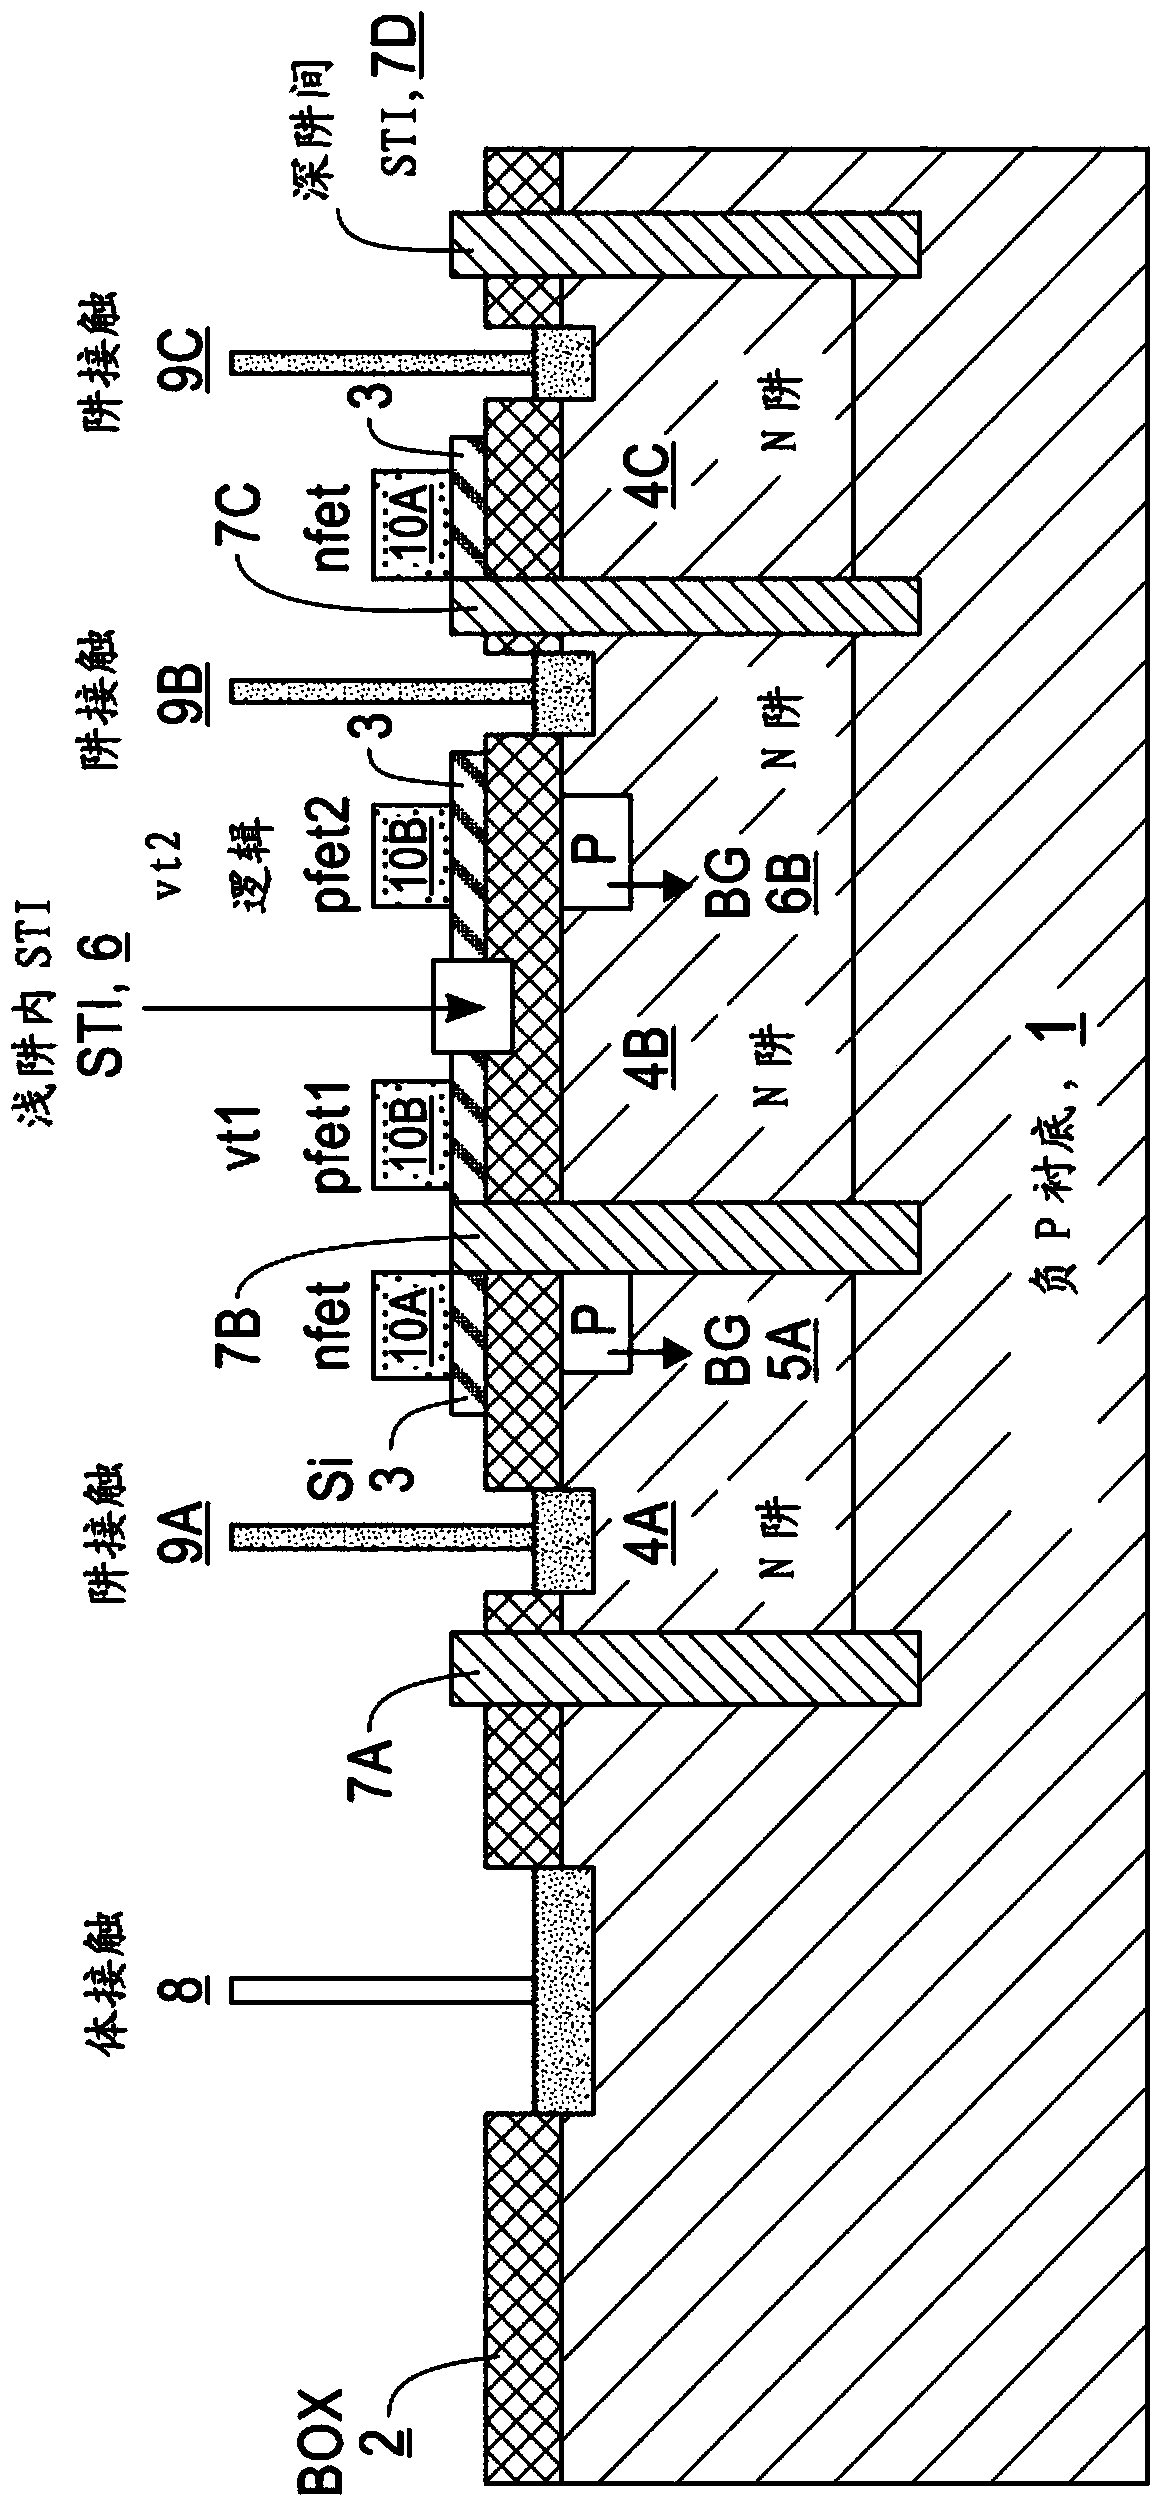 Improved structure for cmos etsoi with multiple threshold voltages and active well bias capability